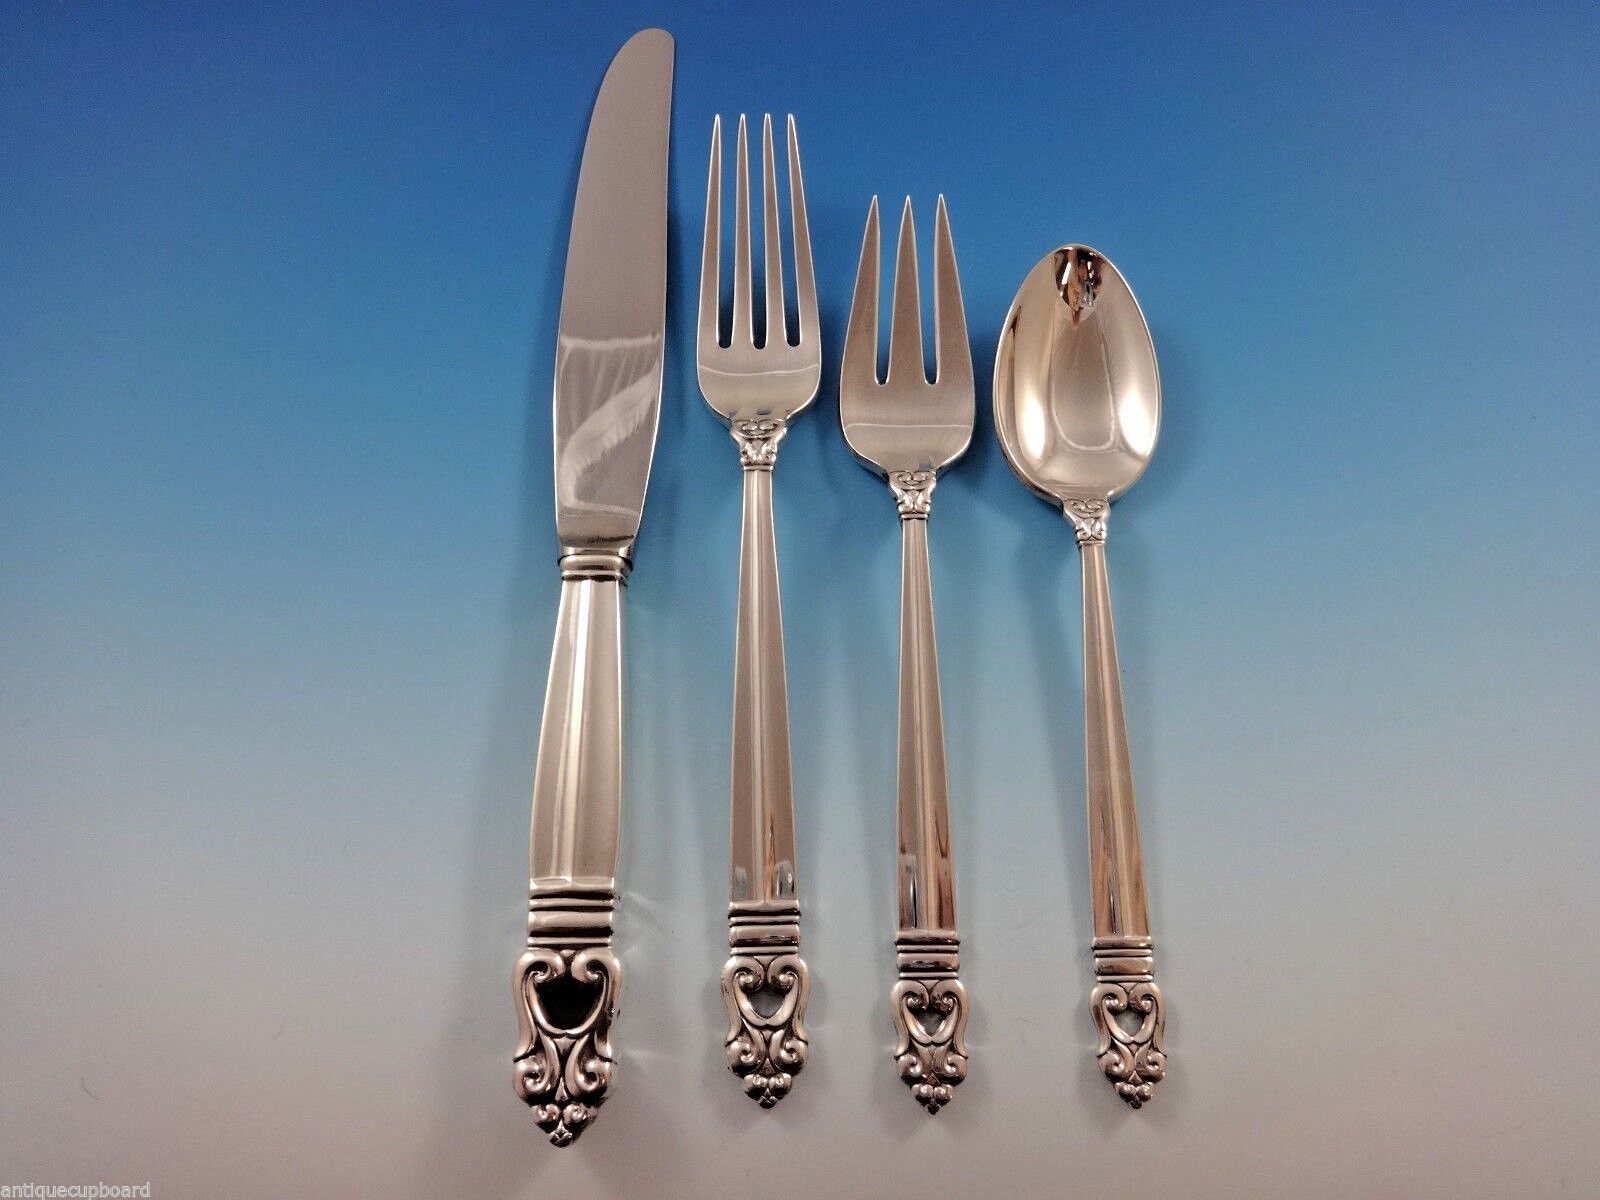 Royal Danish by International Sterling Silver Flatware Set Service 24 Pieces